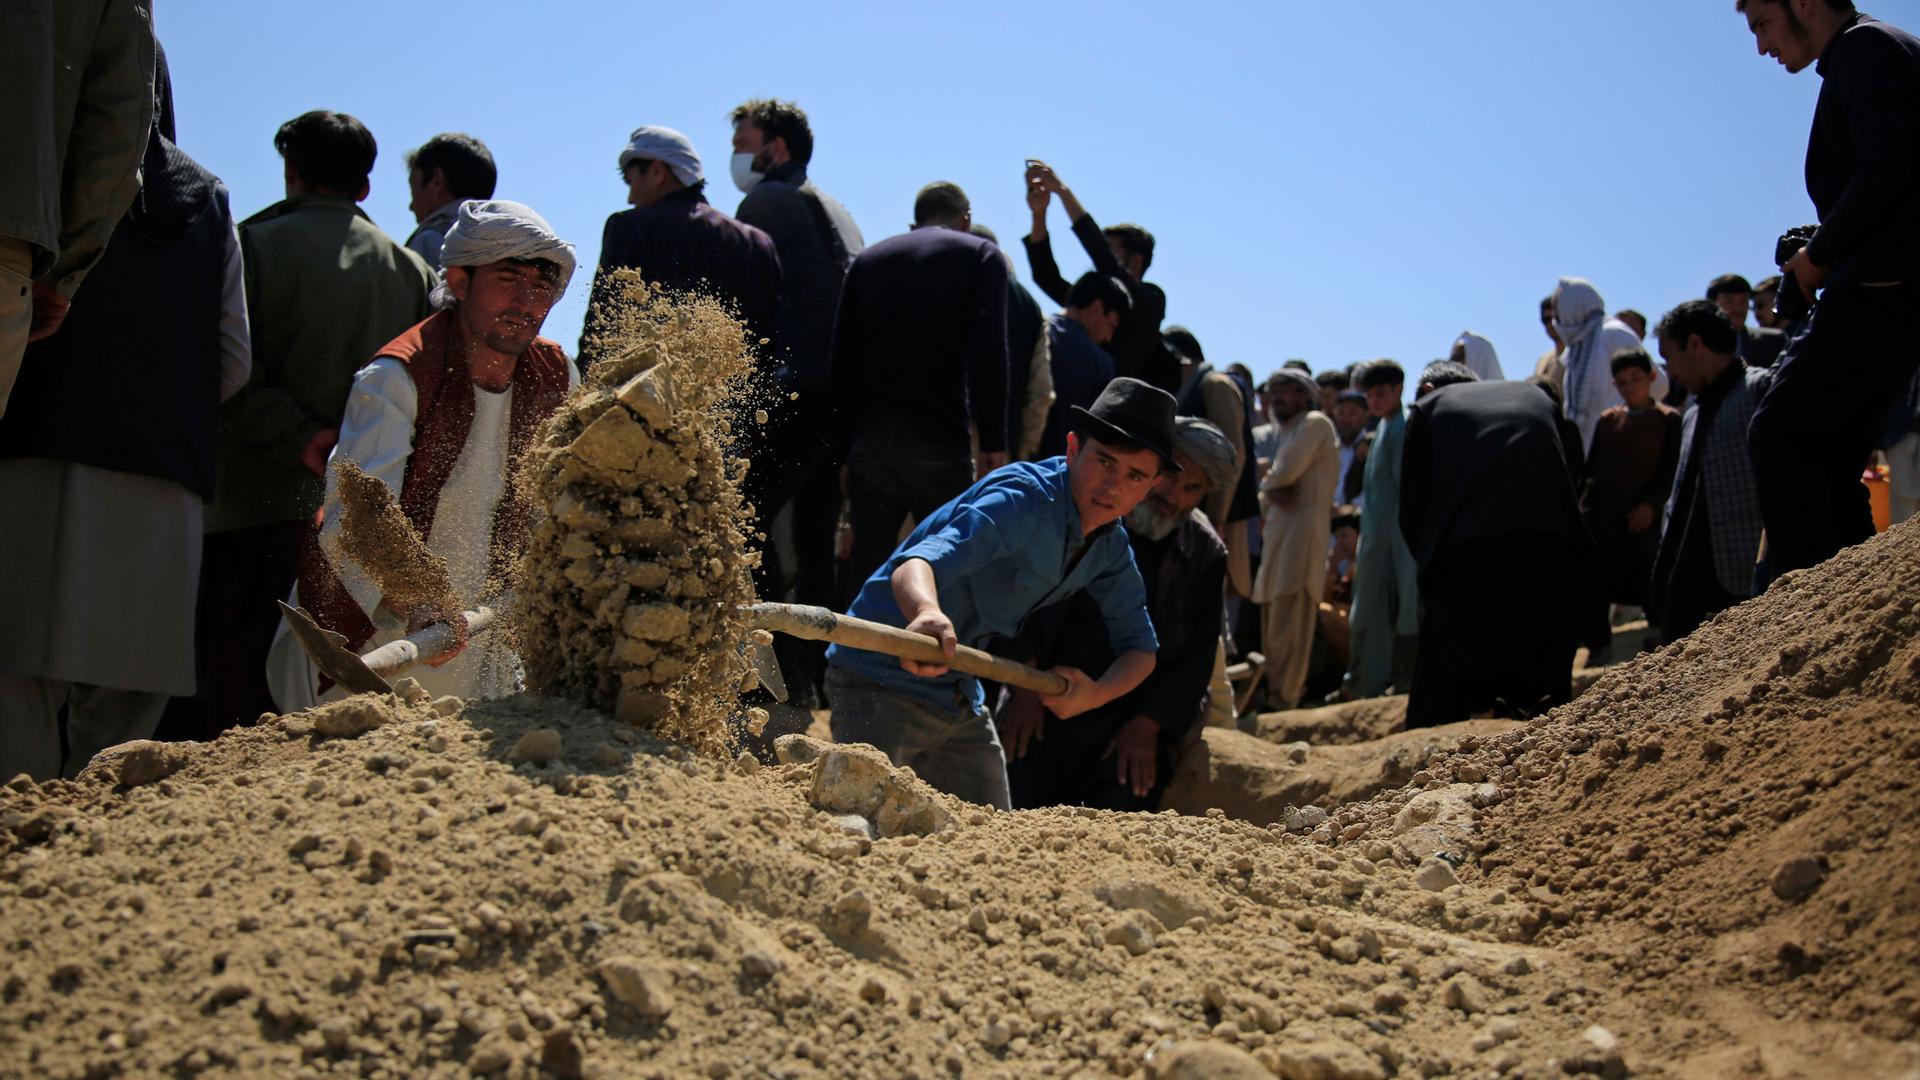 A large crowd of people are show at a cemetery as a man holds a shovel and is digging a burial site.